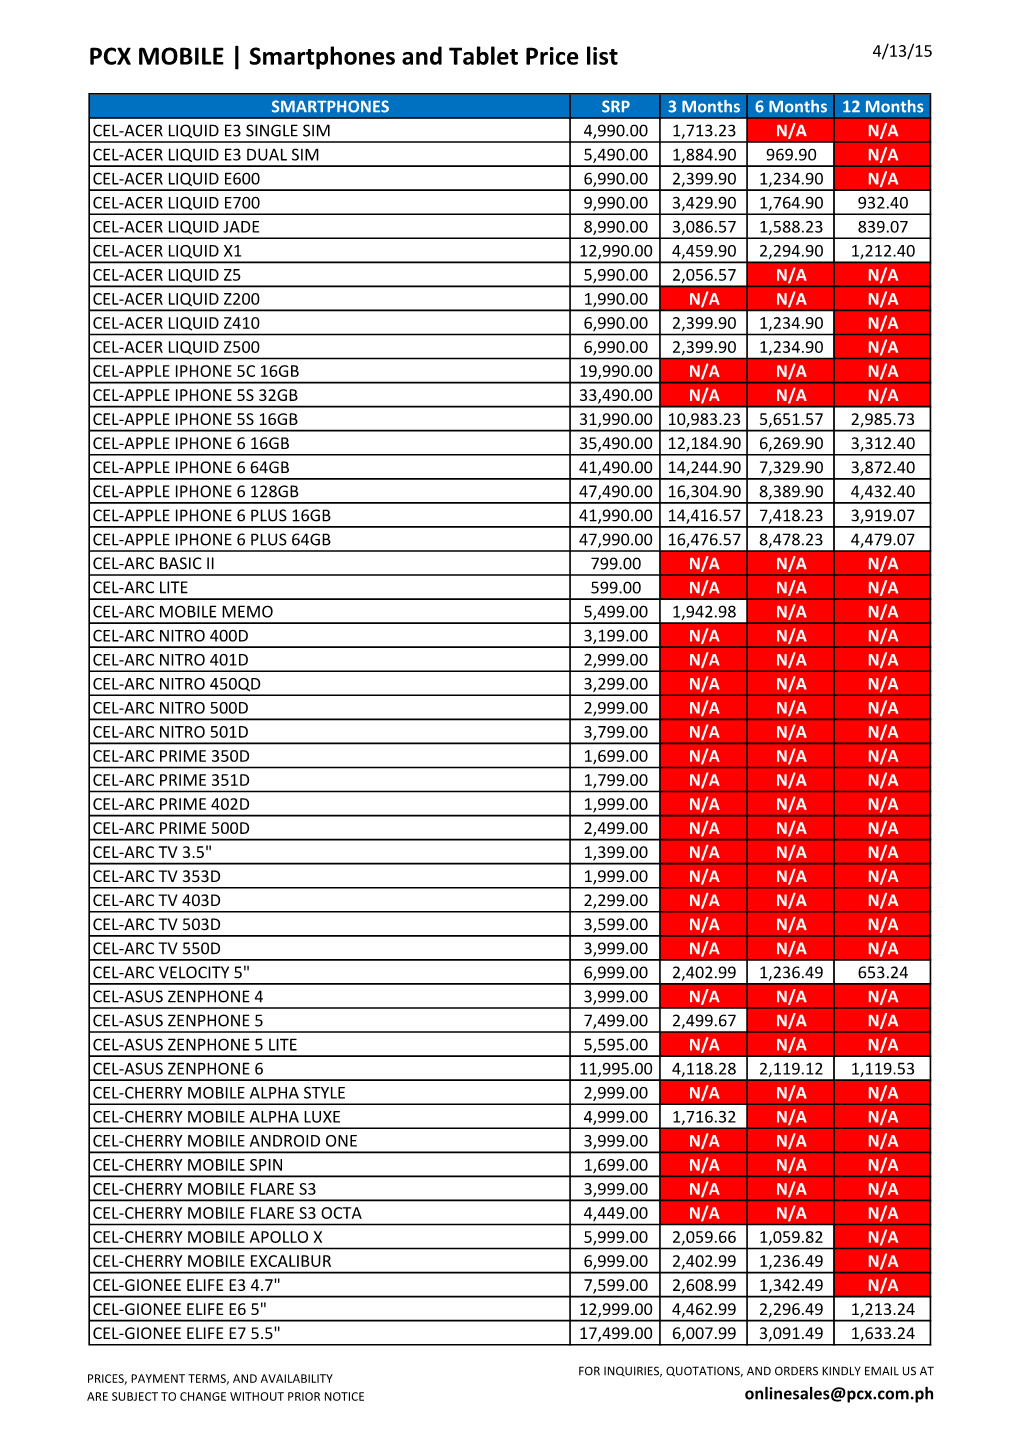 PCX MOBILE | Smartphones and Tablet Price List 4/13/15